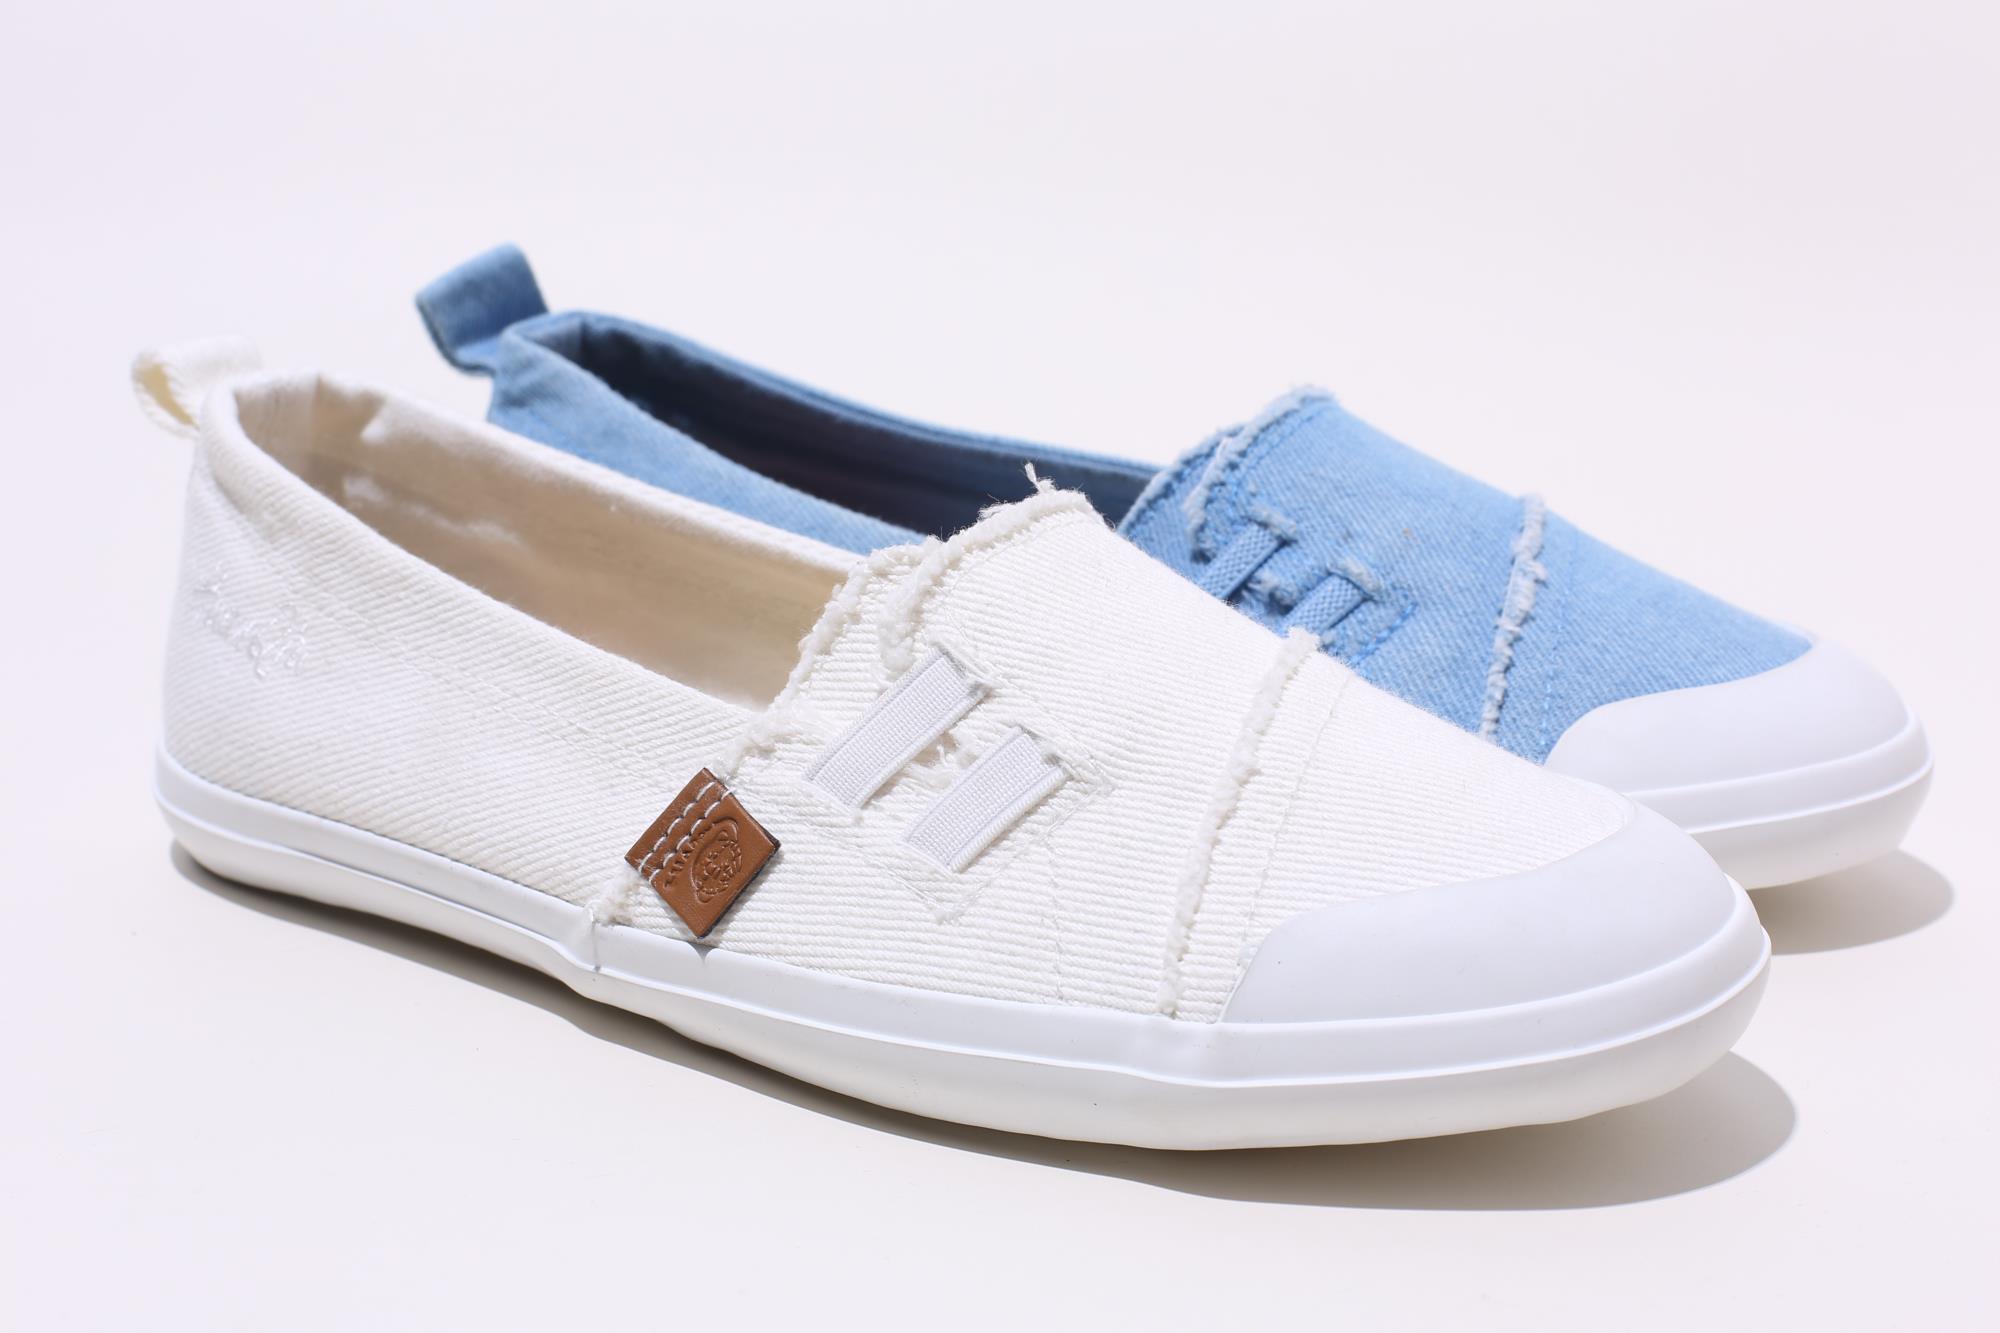 Newest design top quality custom blue white canvas casual shoes